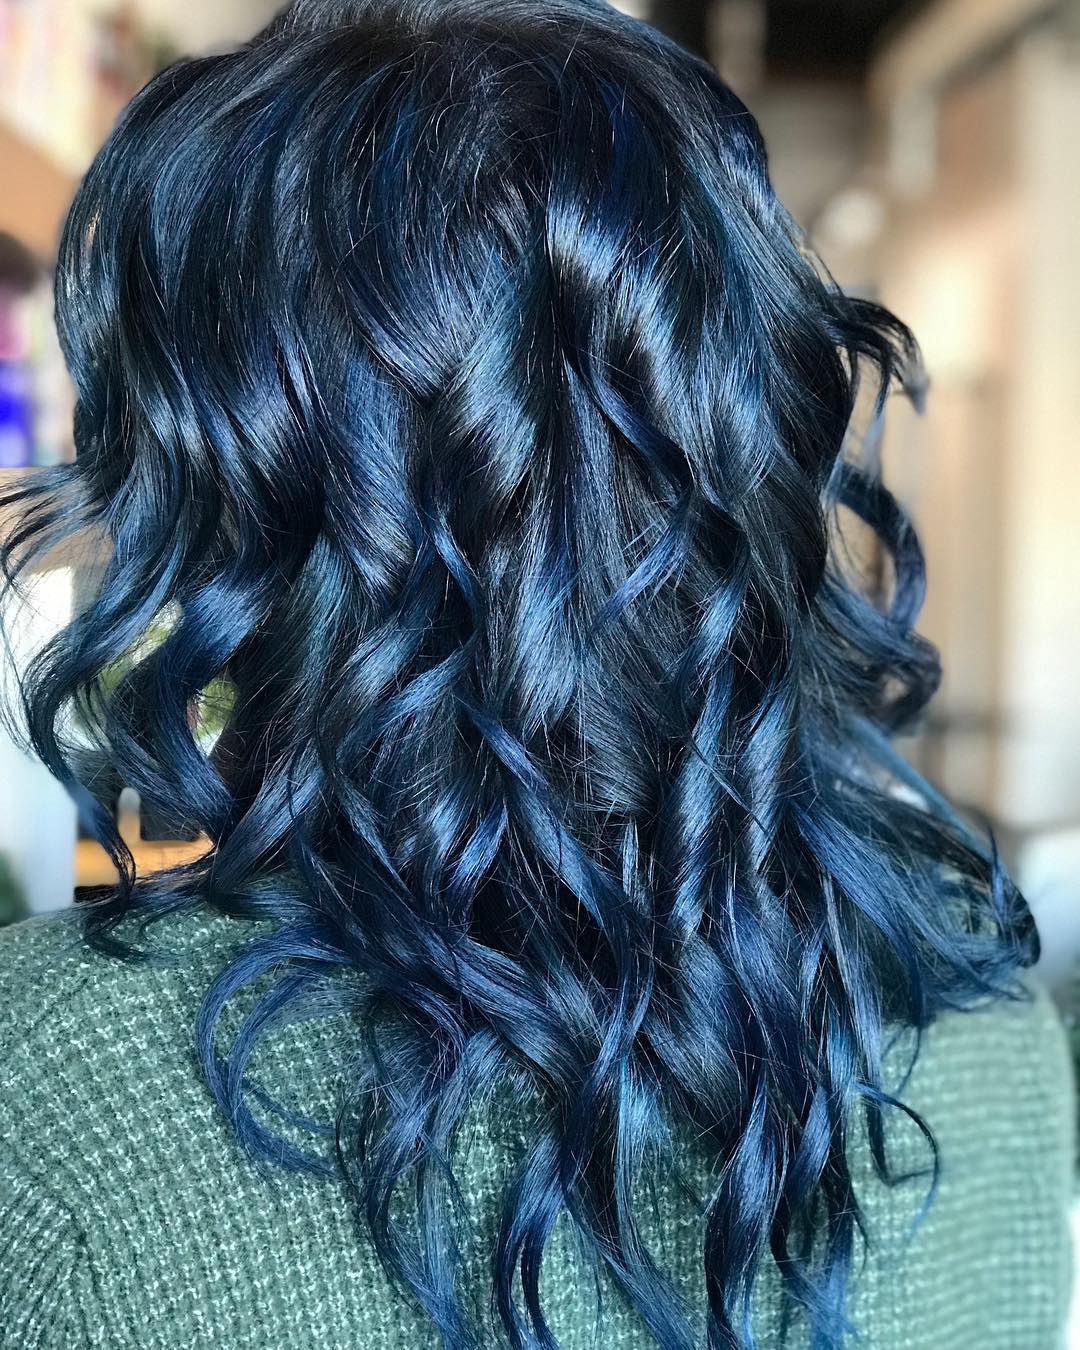 Dark Blue Hair - How To Get This Darker Hair Color In 2023